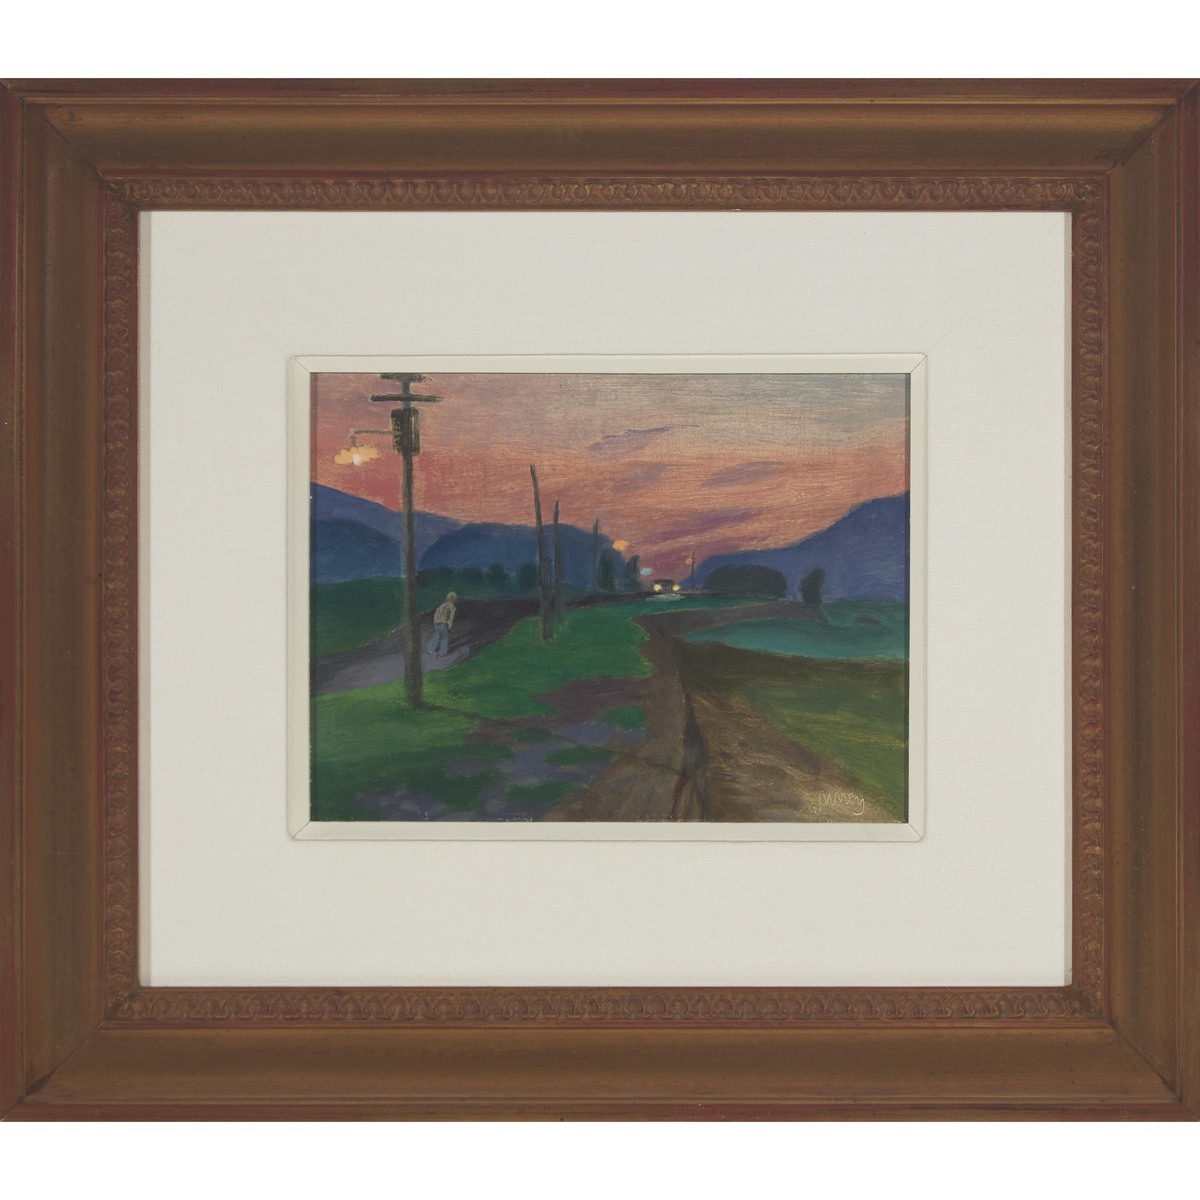 Philip Henry Howard Surrey, RCA (1910-1990), EVENING, BAIE ST. PAUL, 5.75 x 7.875 in — 14.6 x 20 cm - Image 2 of 5